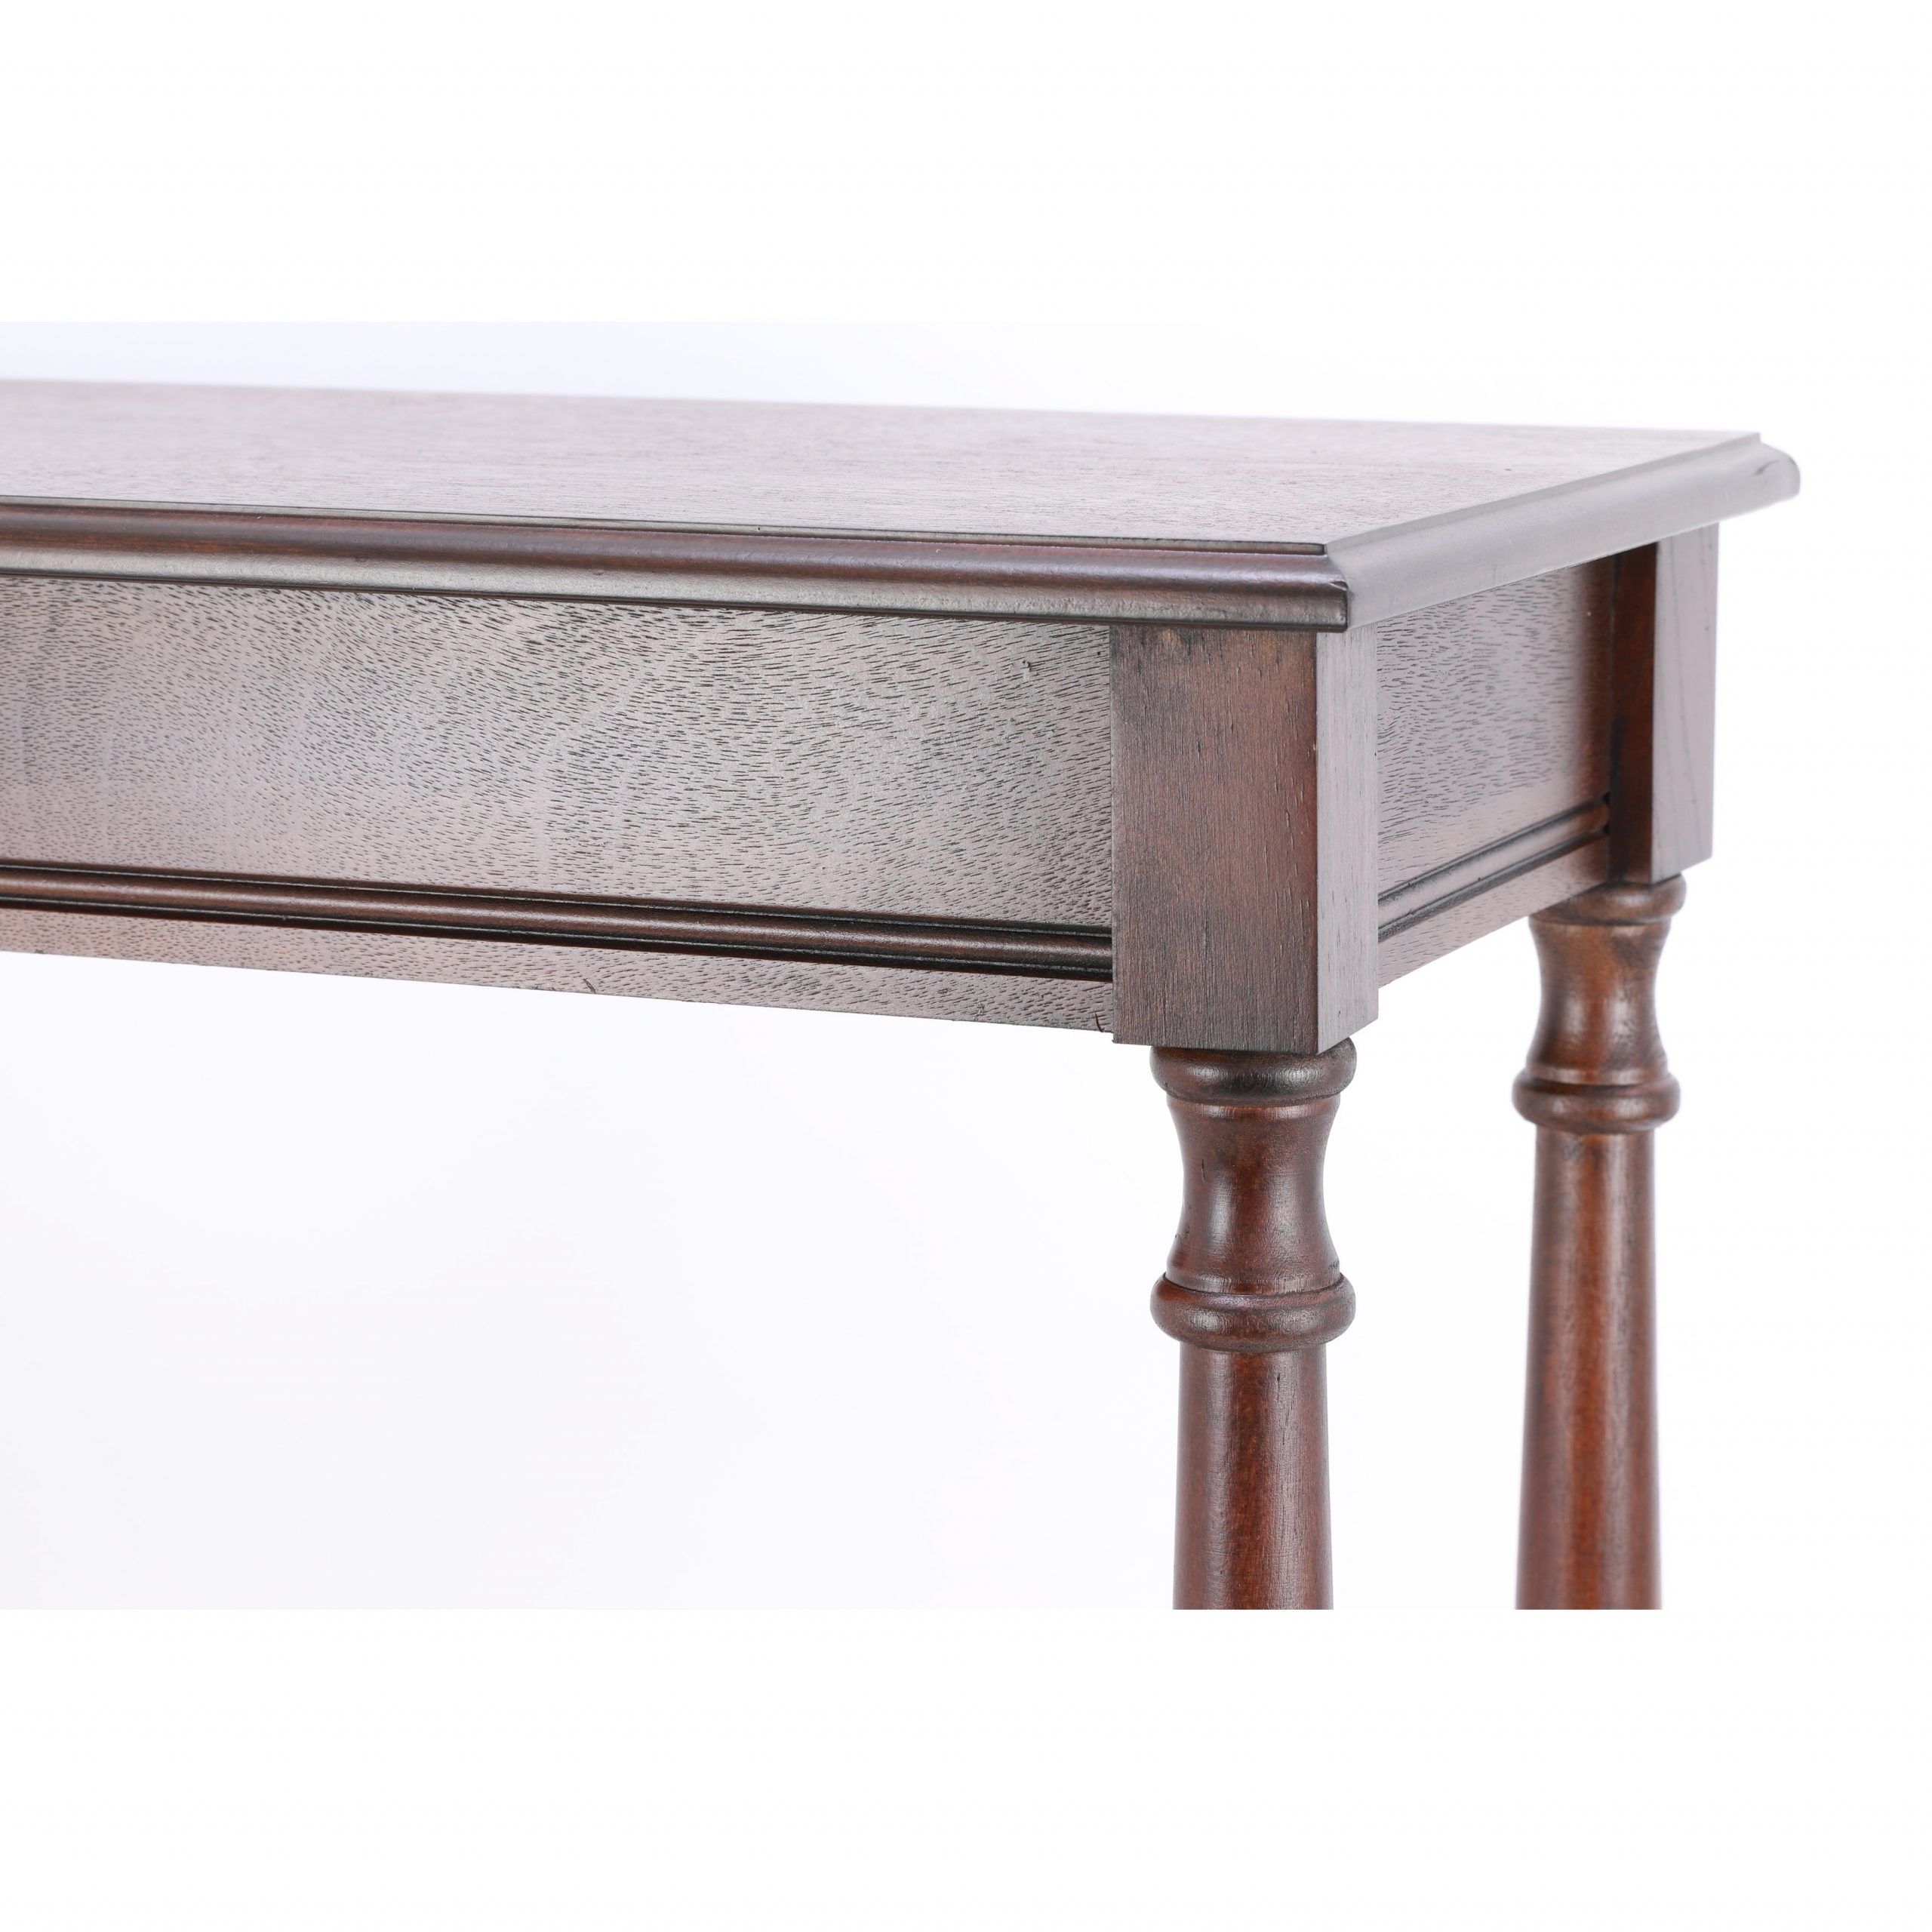 Copper Grove Cortinada Rectangular Console Table | Ebay With Regard To Bronze Metal Rectangular Console Tables (View 6 of 20)